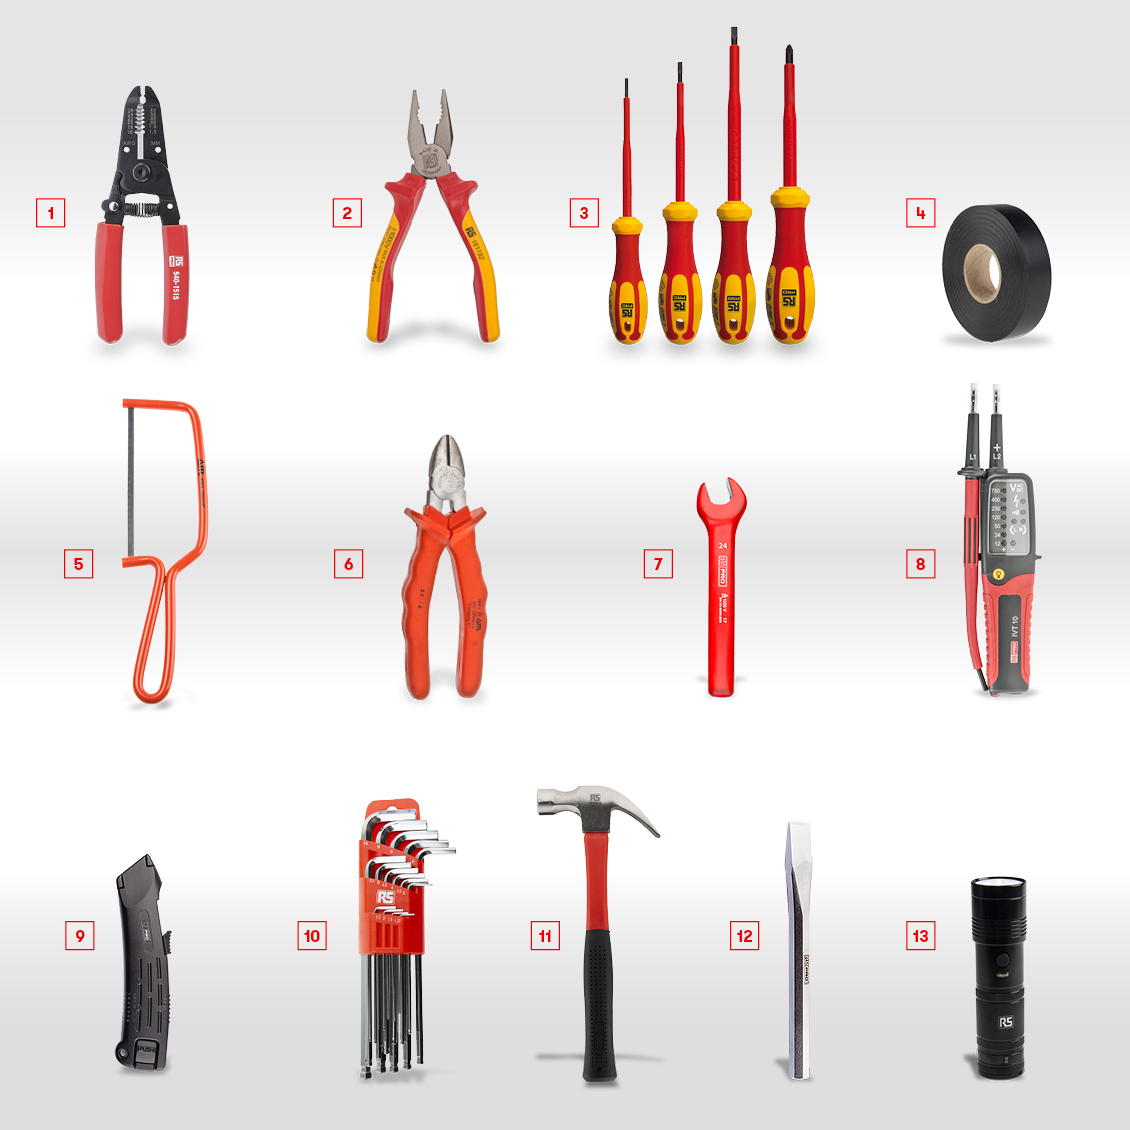 Top 13 Tools For The Best Electricians Tool Kit Rs Components